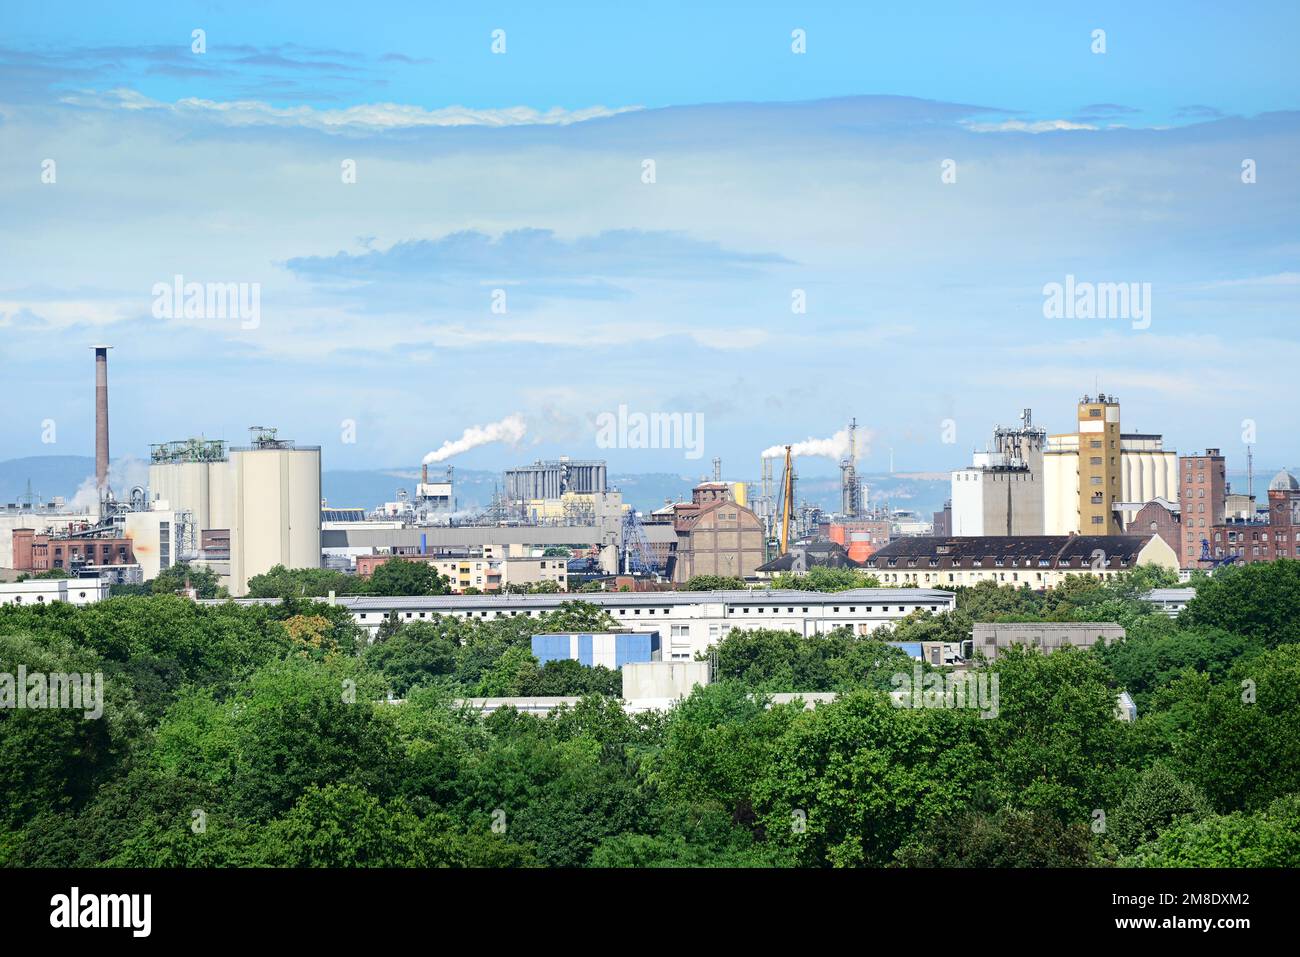 Chemical plant in the city. Stock Photo